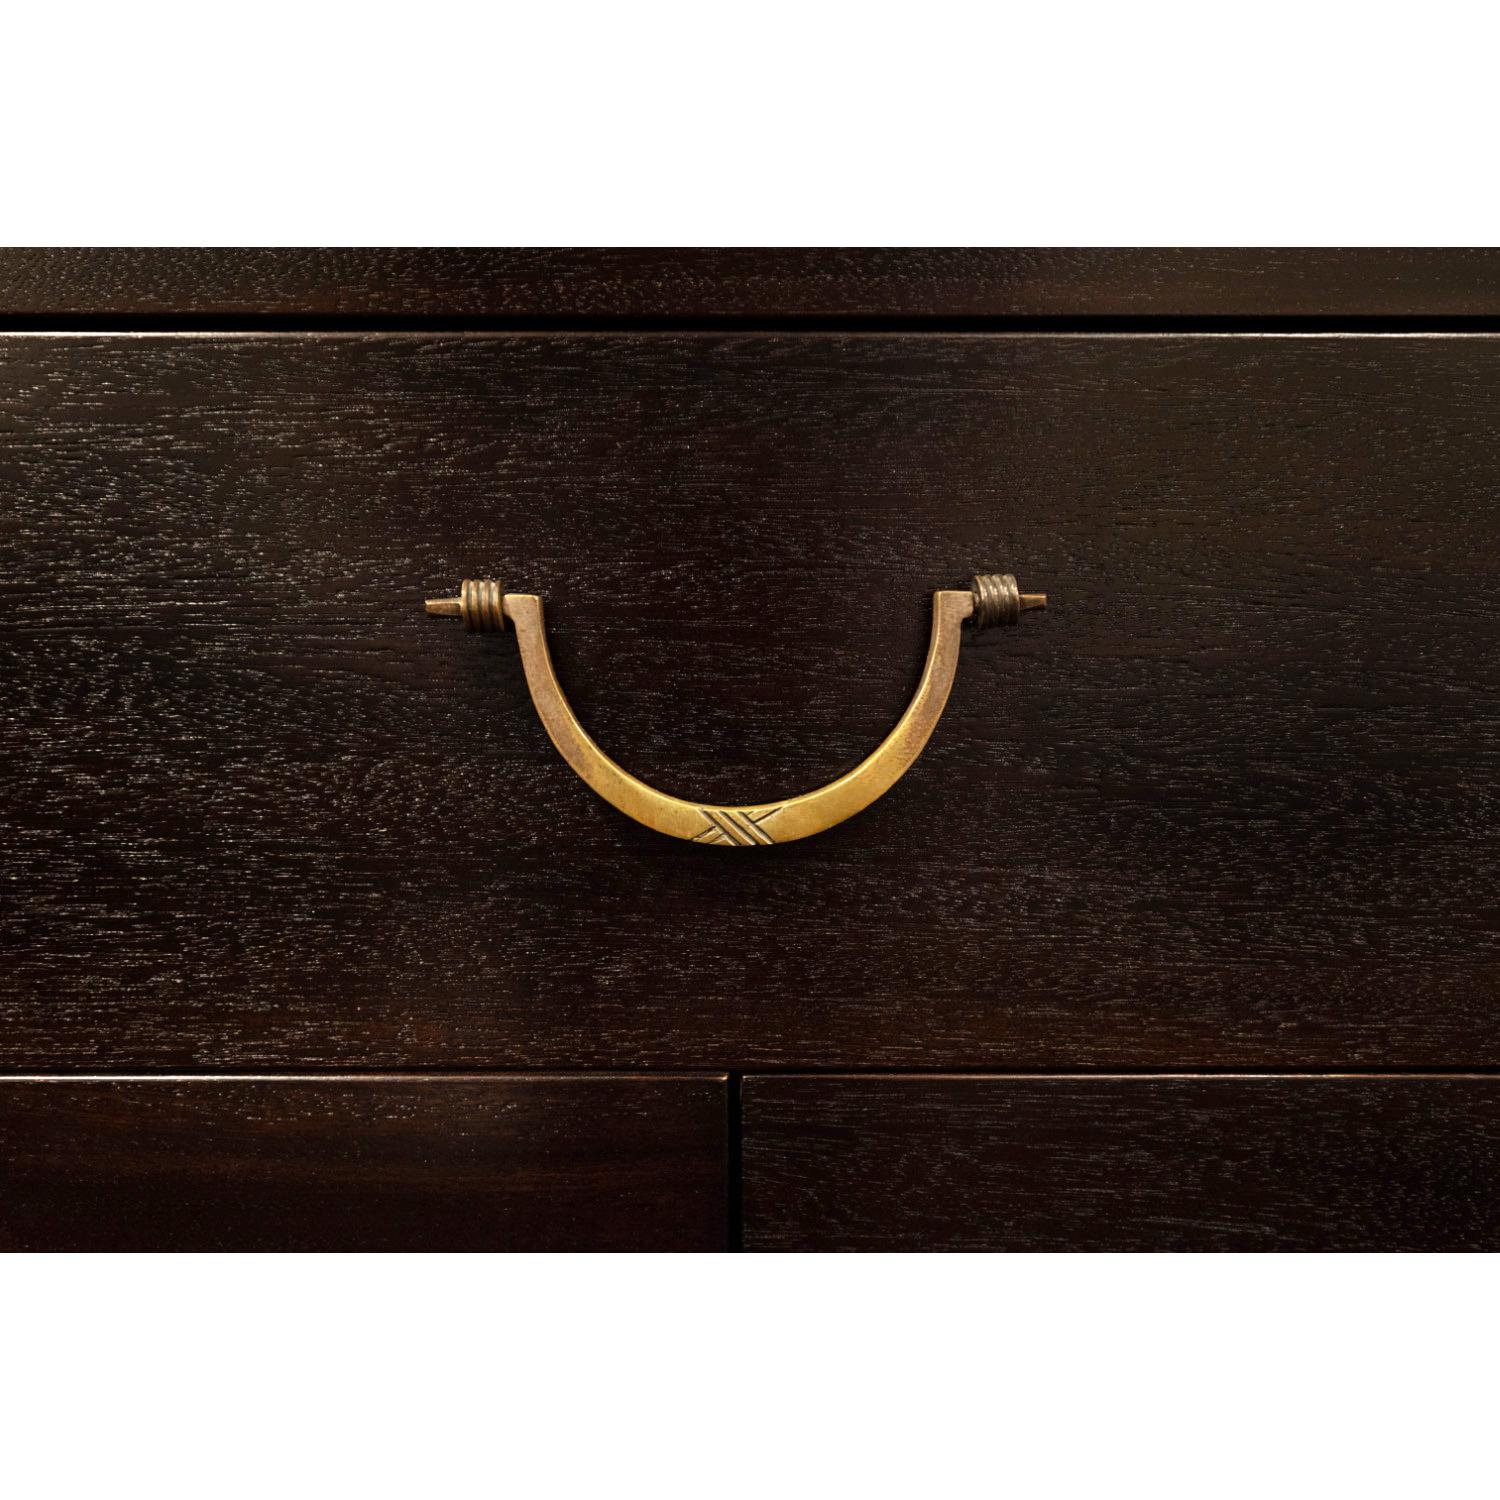 American Tommi Parzinger Elegant Chest of Drawers with Etched Brass Pulls 1950s (Signed) For Sale